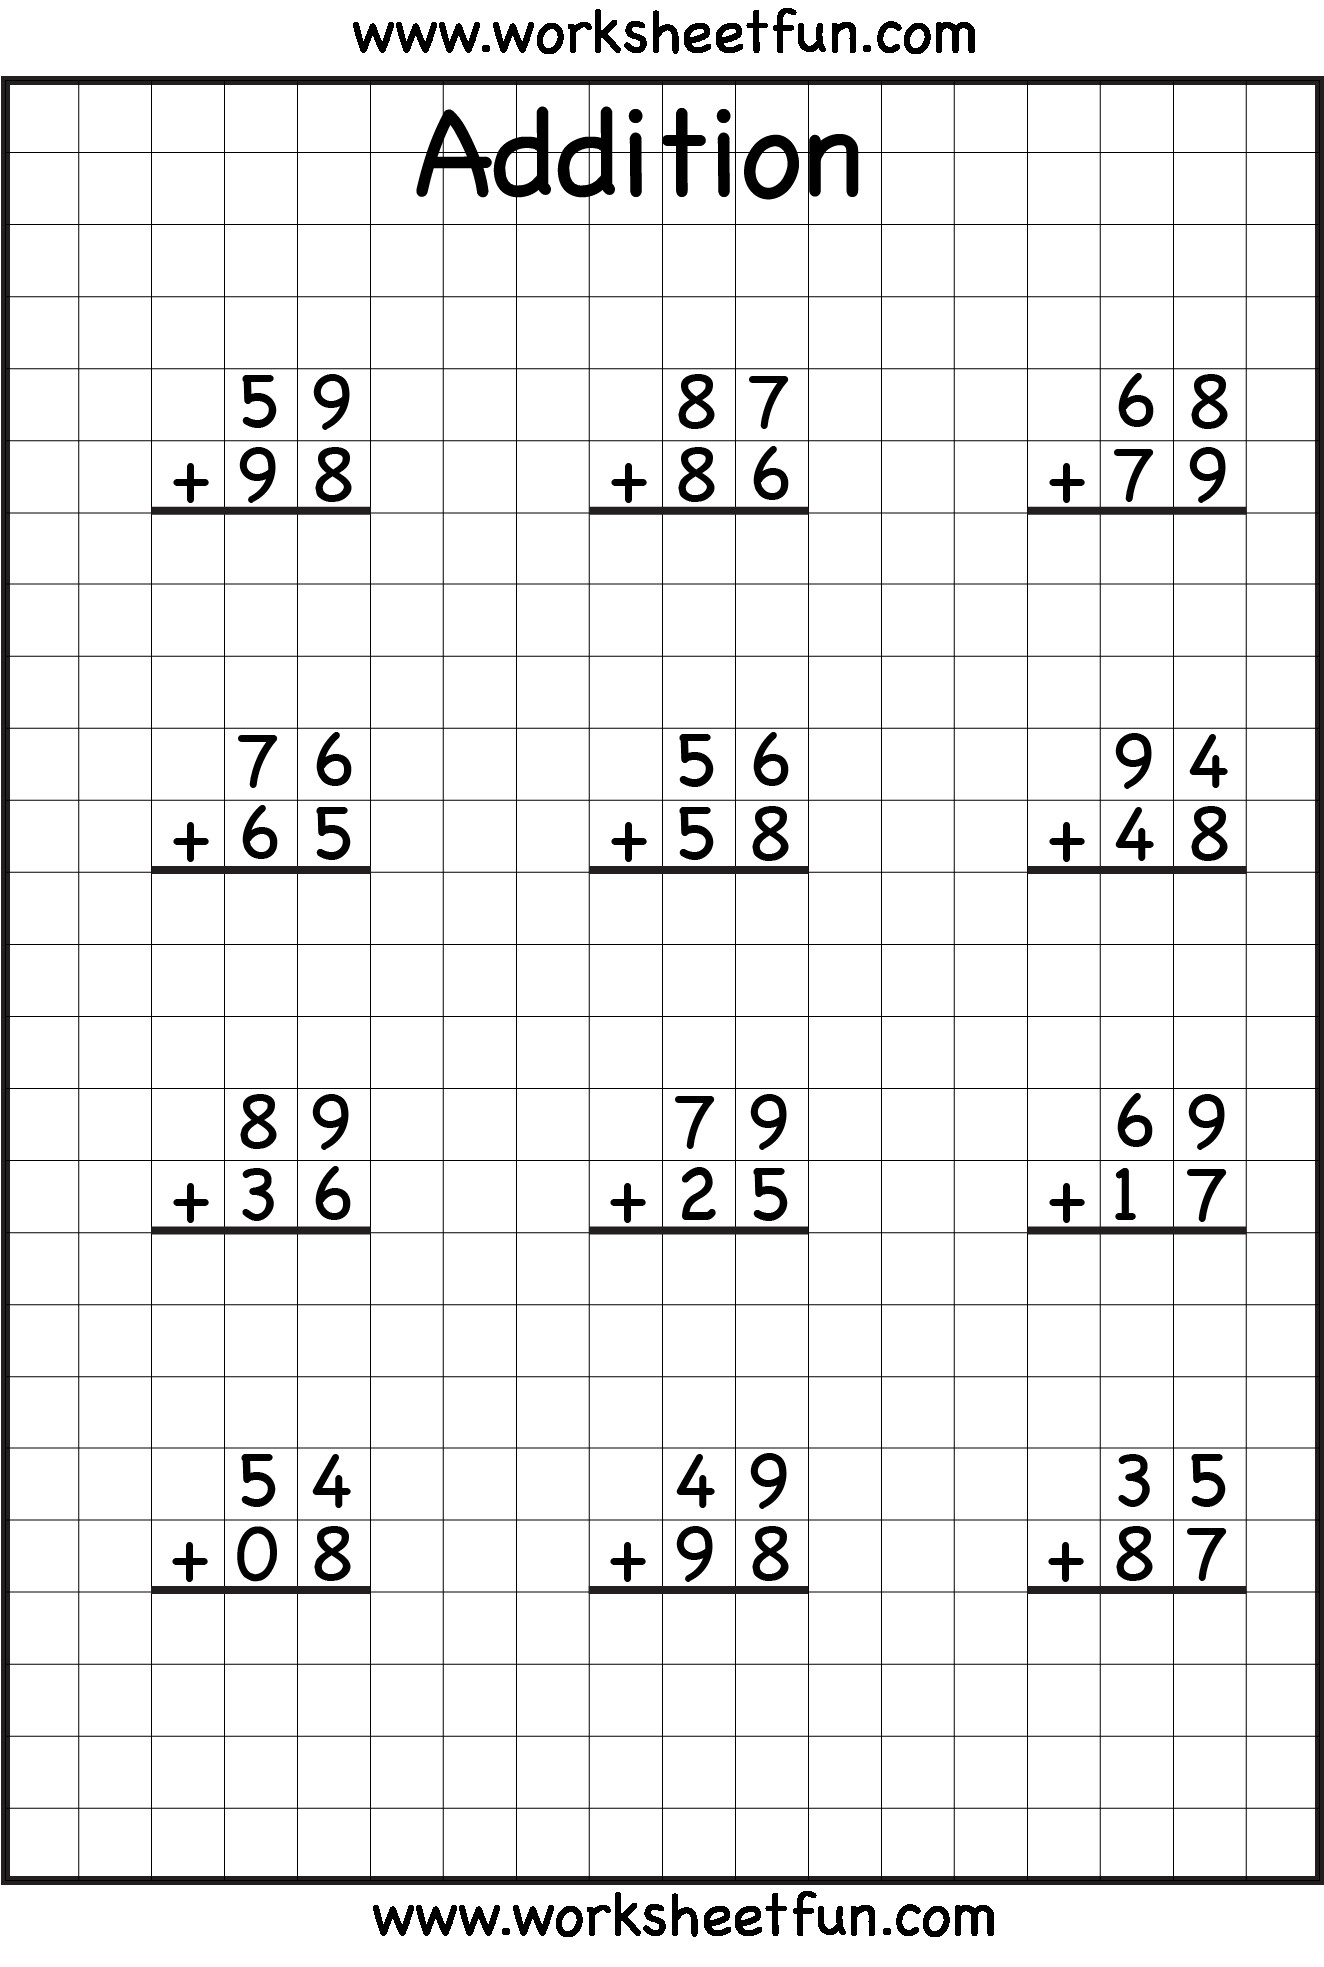 5-free-math-worksheets-third-grade-3-addition-add-3-3-digit-numbers-in